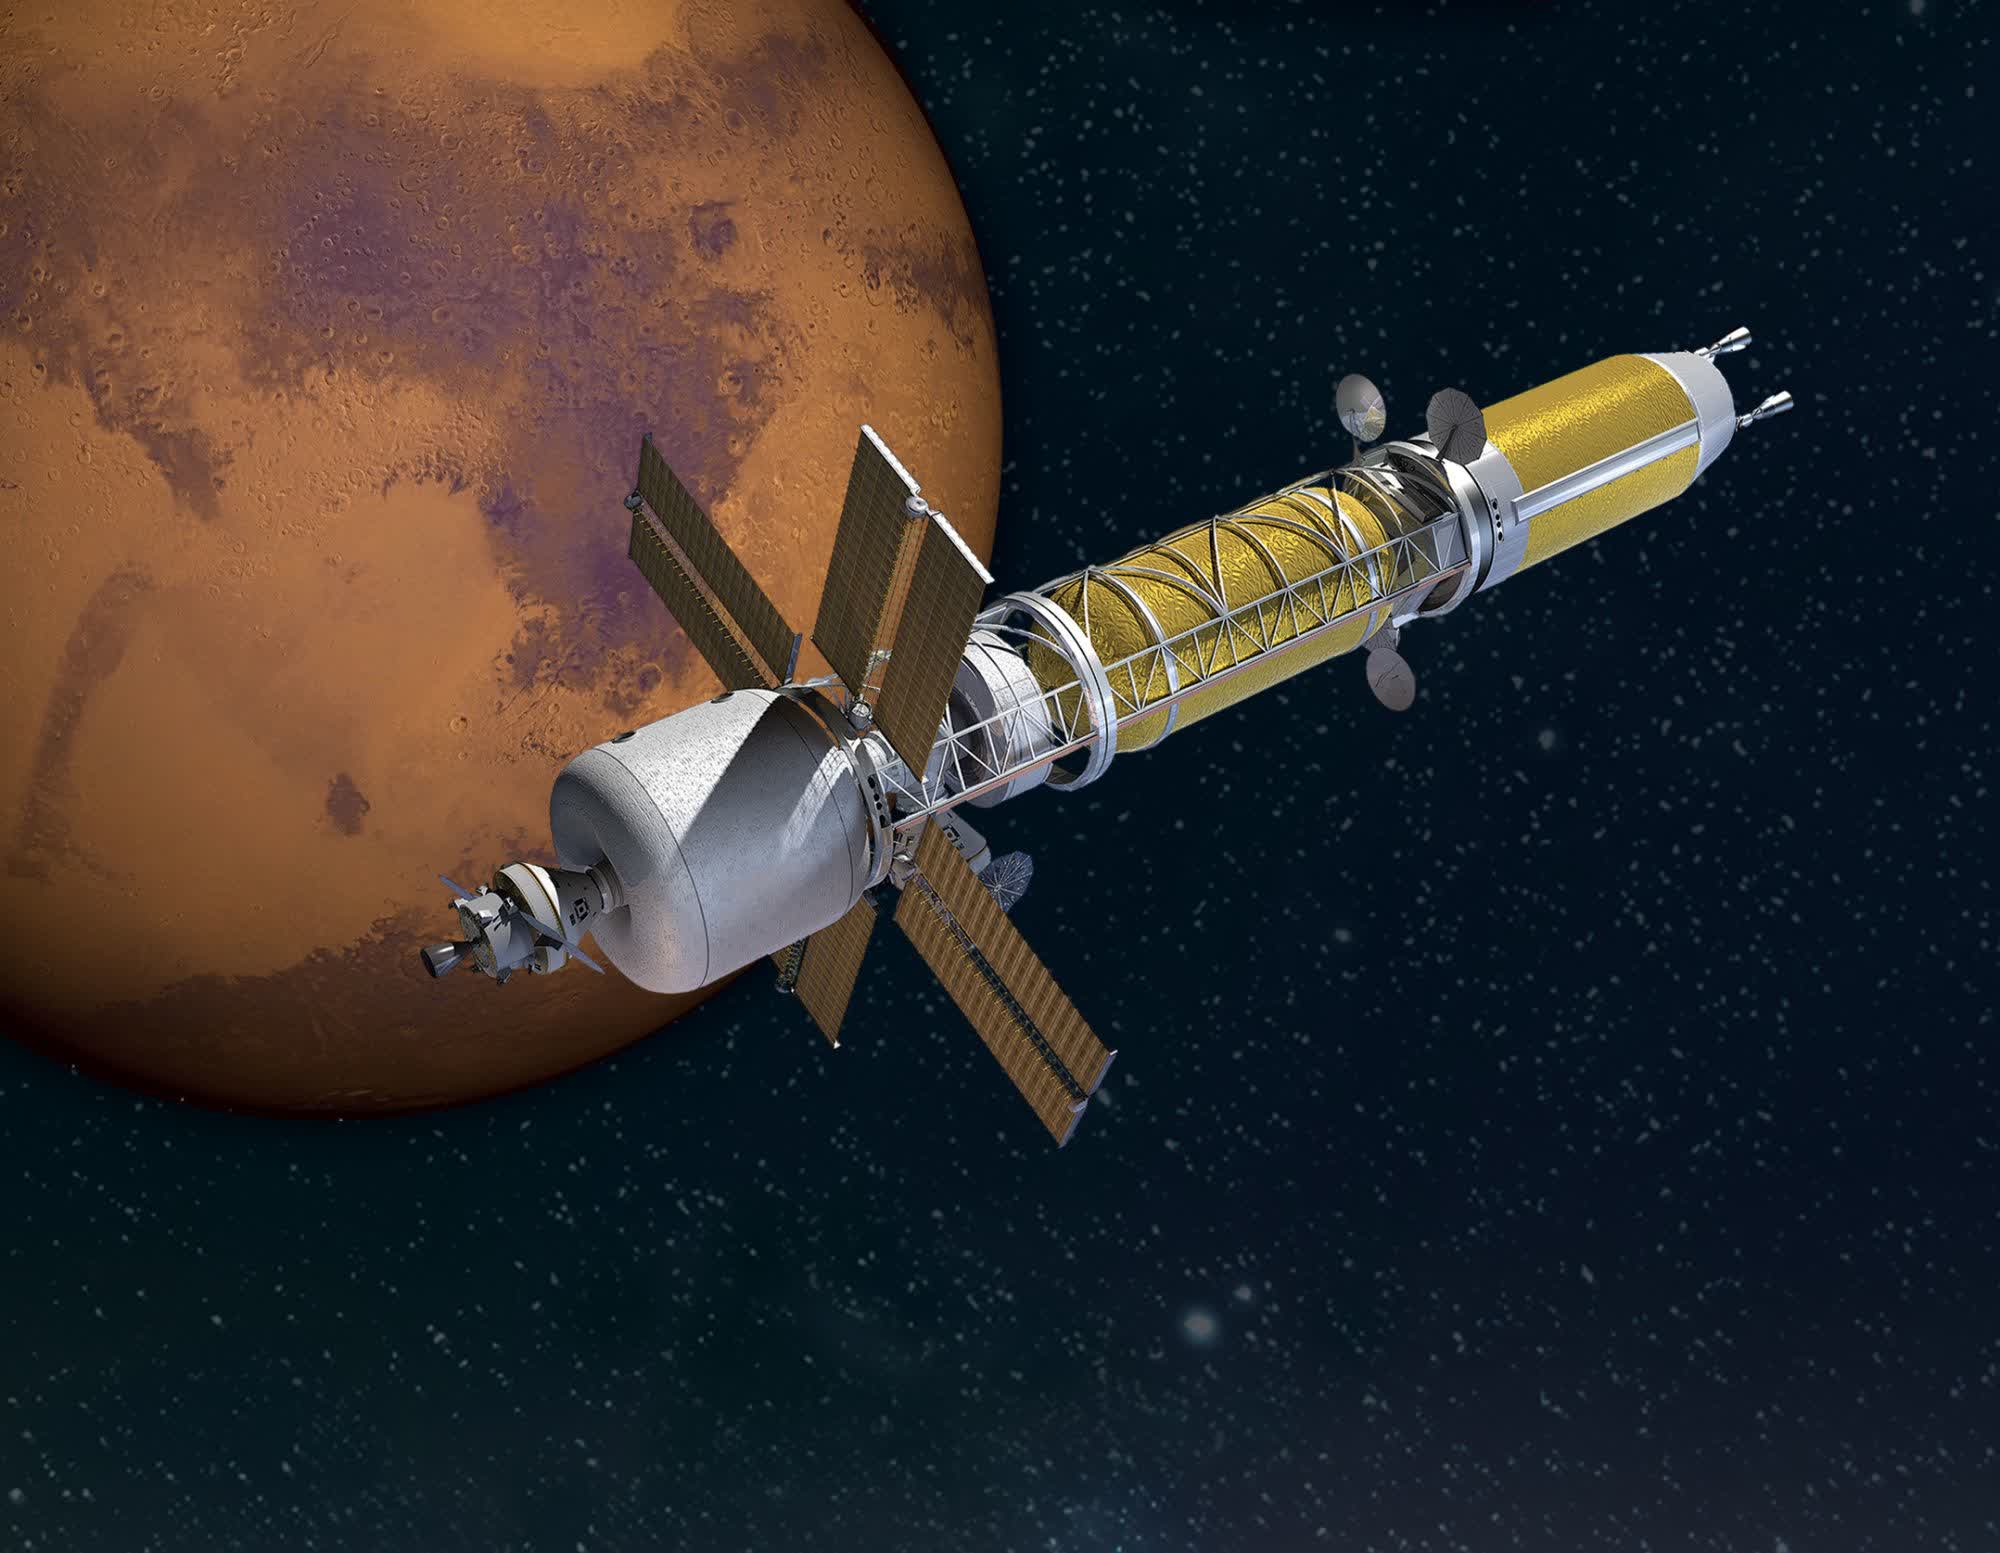 NASA wants to test a nuclear-powered spacecraft within five years